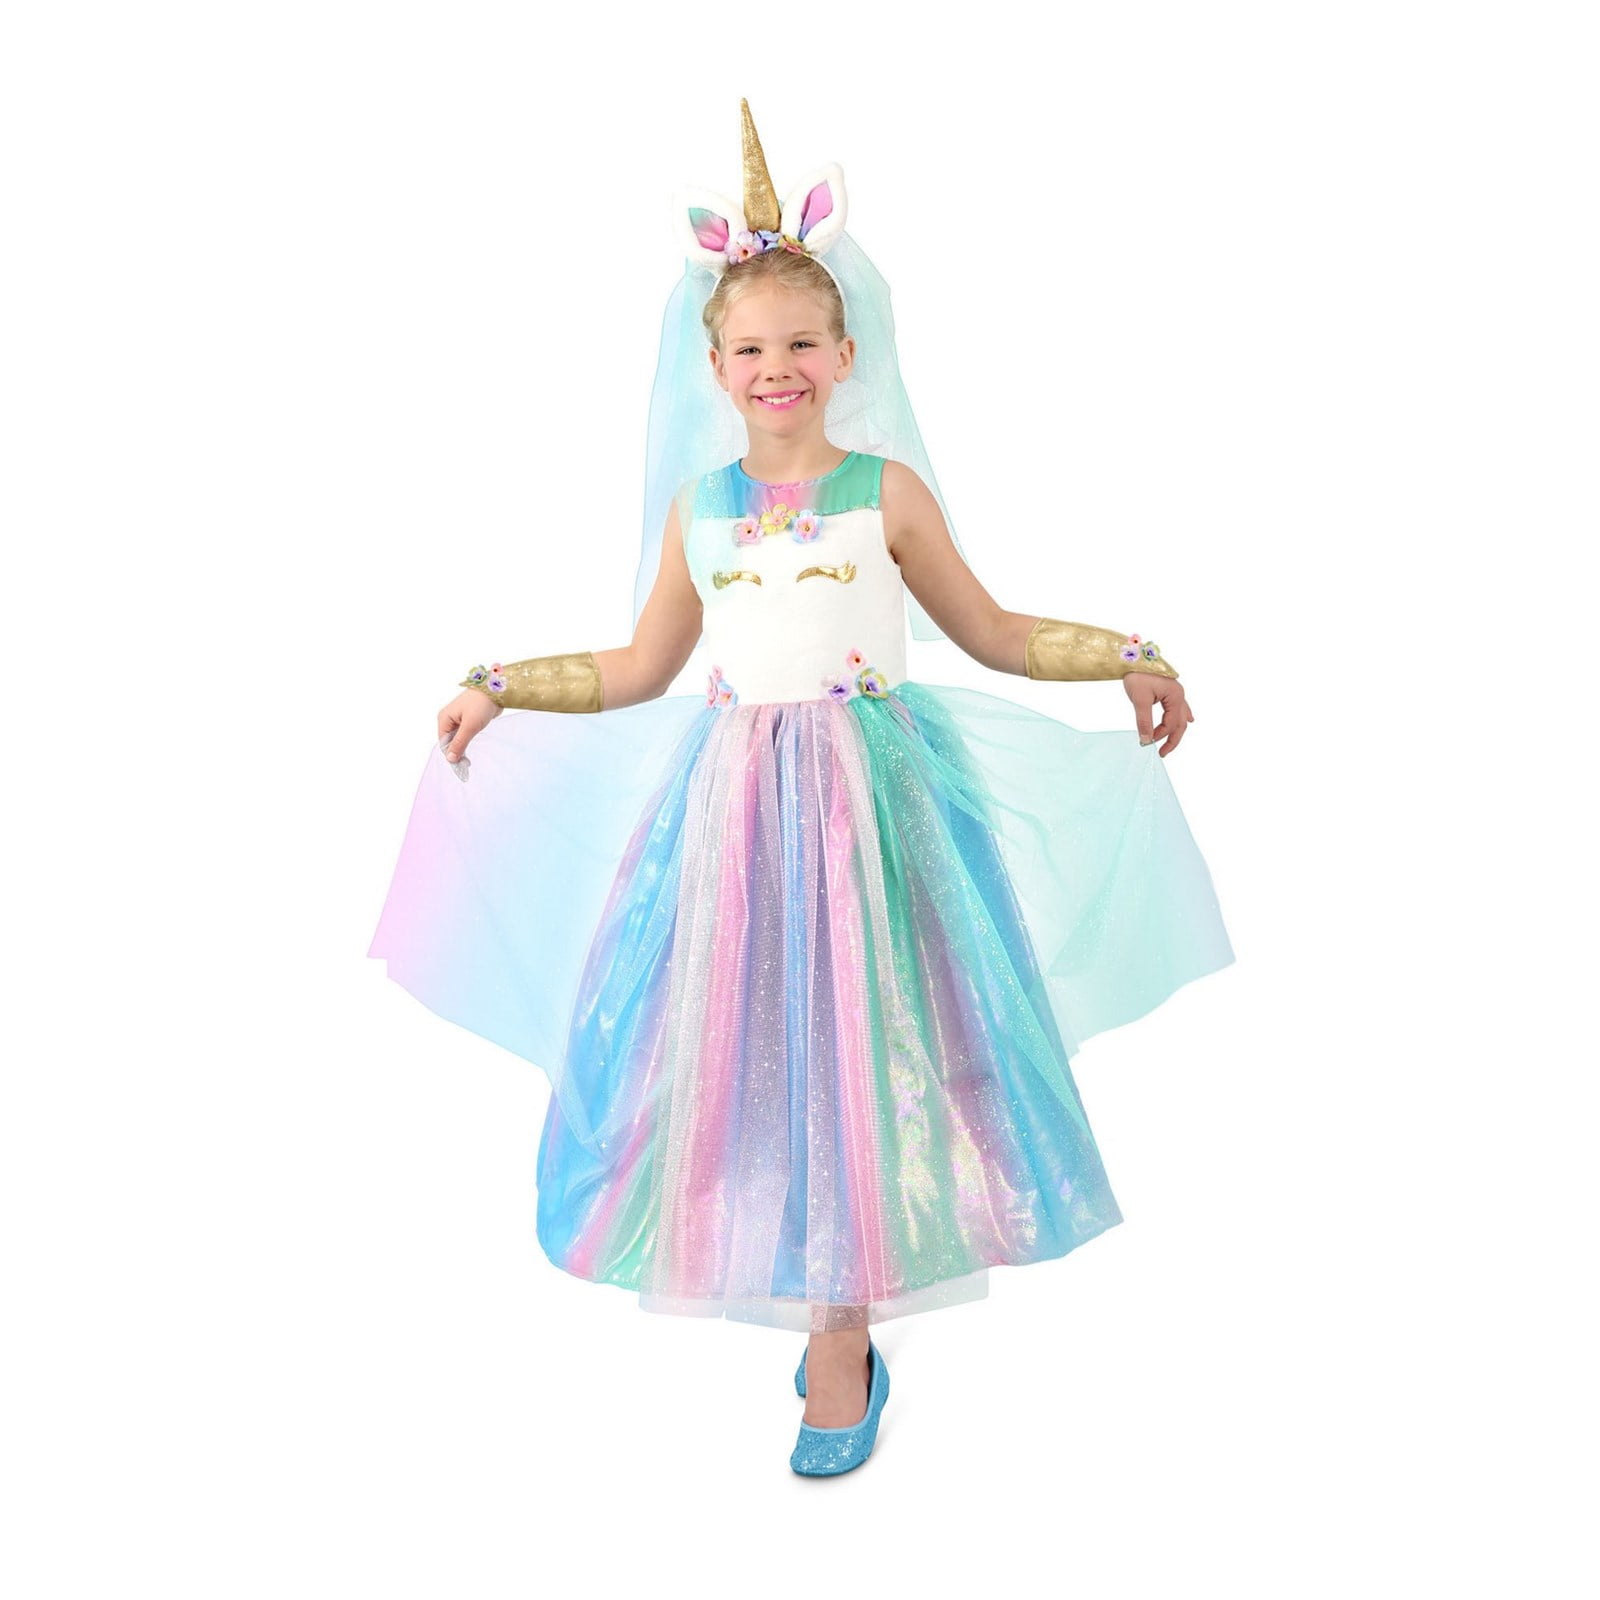 Kids Girls Ride on Unicorn Fantasy Mythical Fancy Dress Carry Costume Book Day 